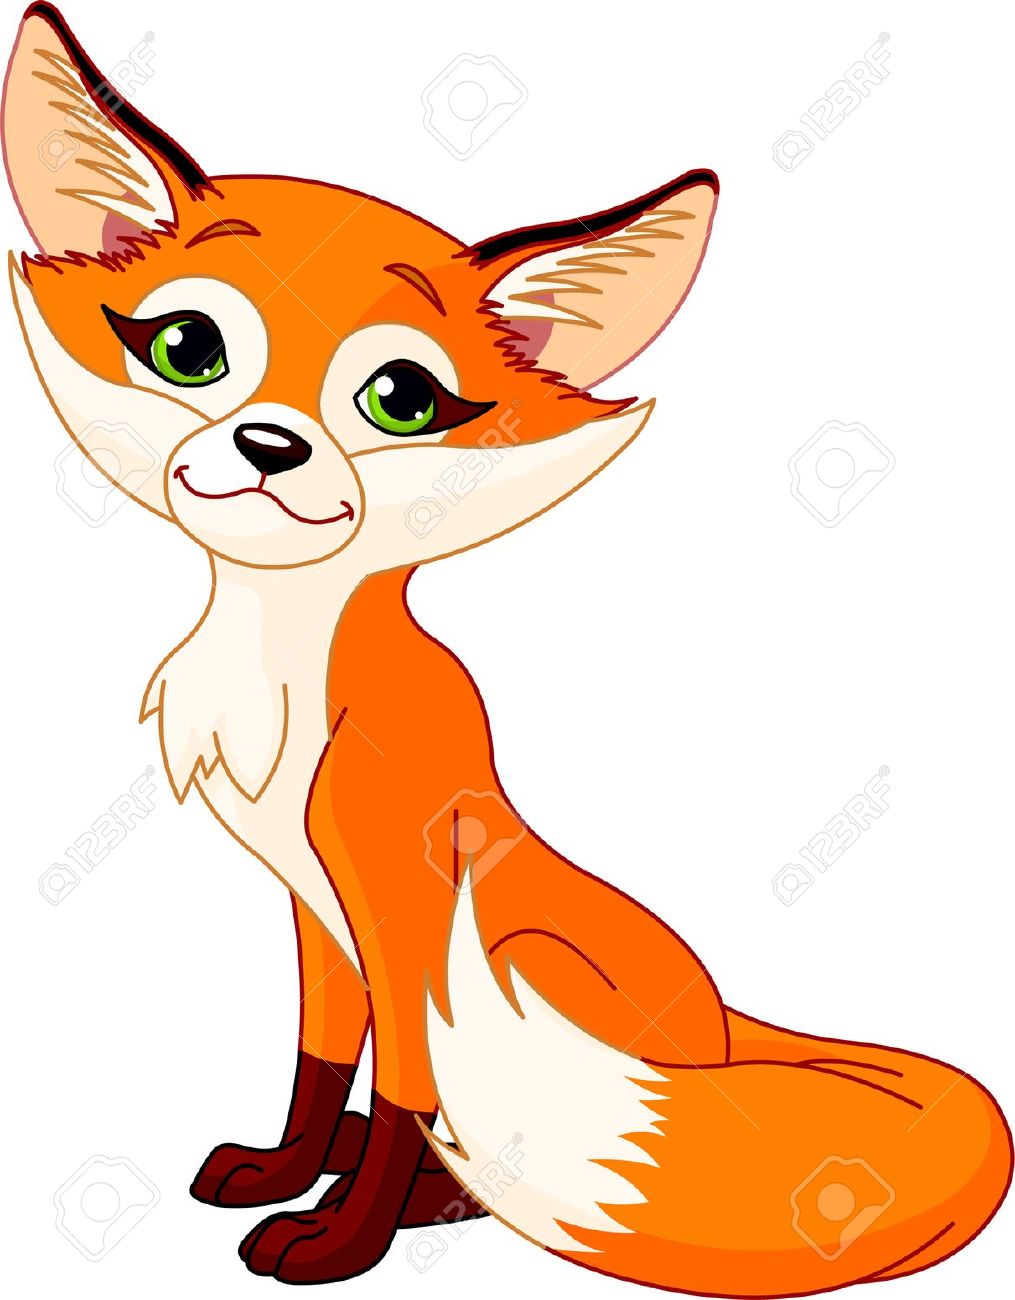 19,710 Fox Cliparts, Stock Vector And Royalty Free Fox Illustrations.